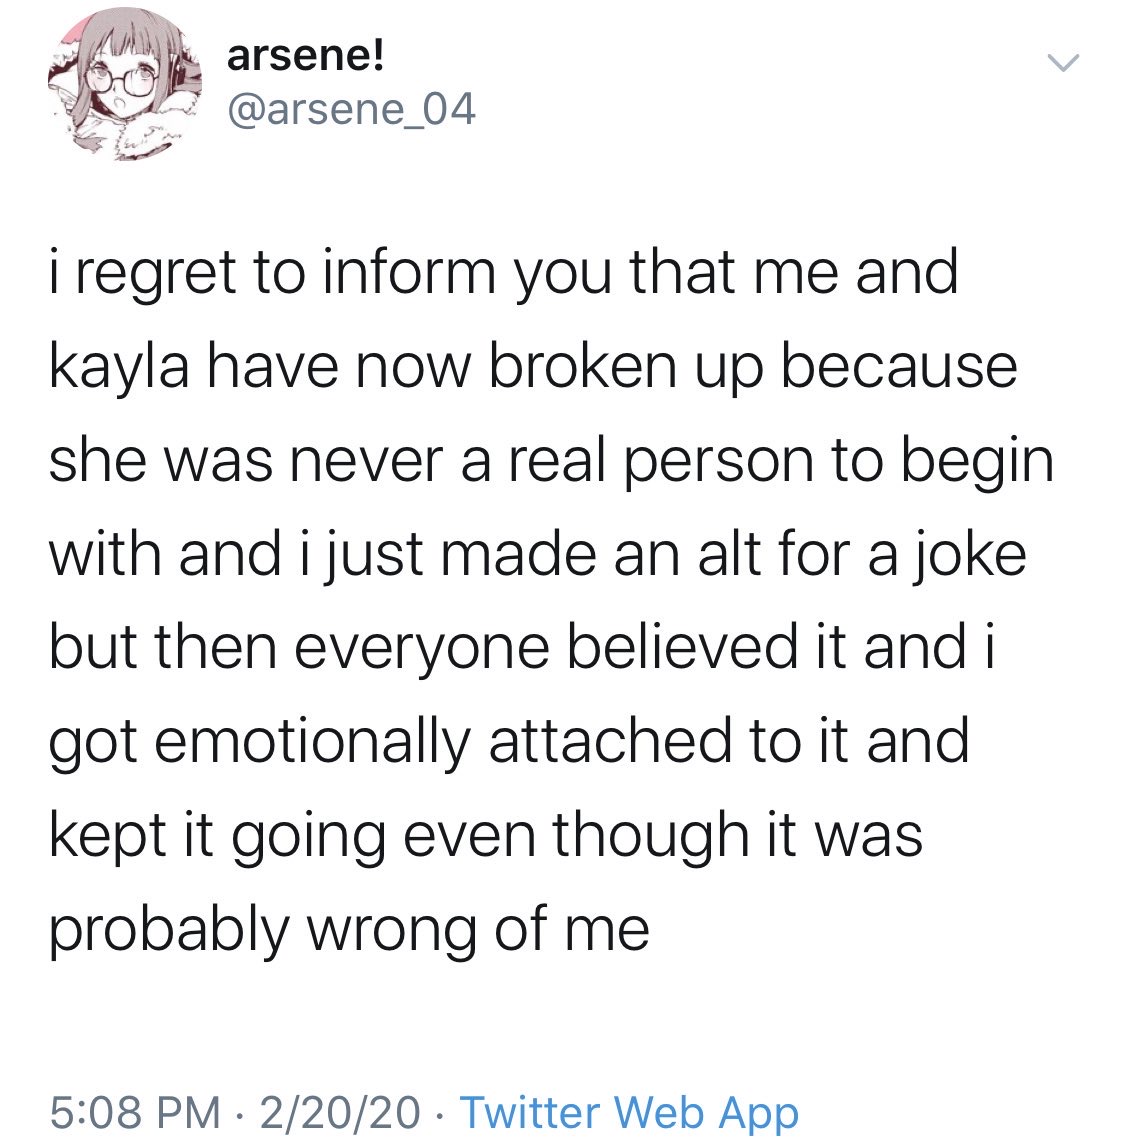 angle - arsene! i regret to inform you that me and kayla have now broken up because she was never a real person to begin with and i just made an alt for a joke but then everyone believed it and i got emotionally attached to it and kept it going even thoug